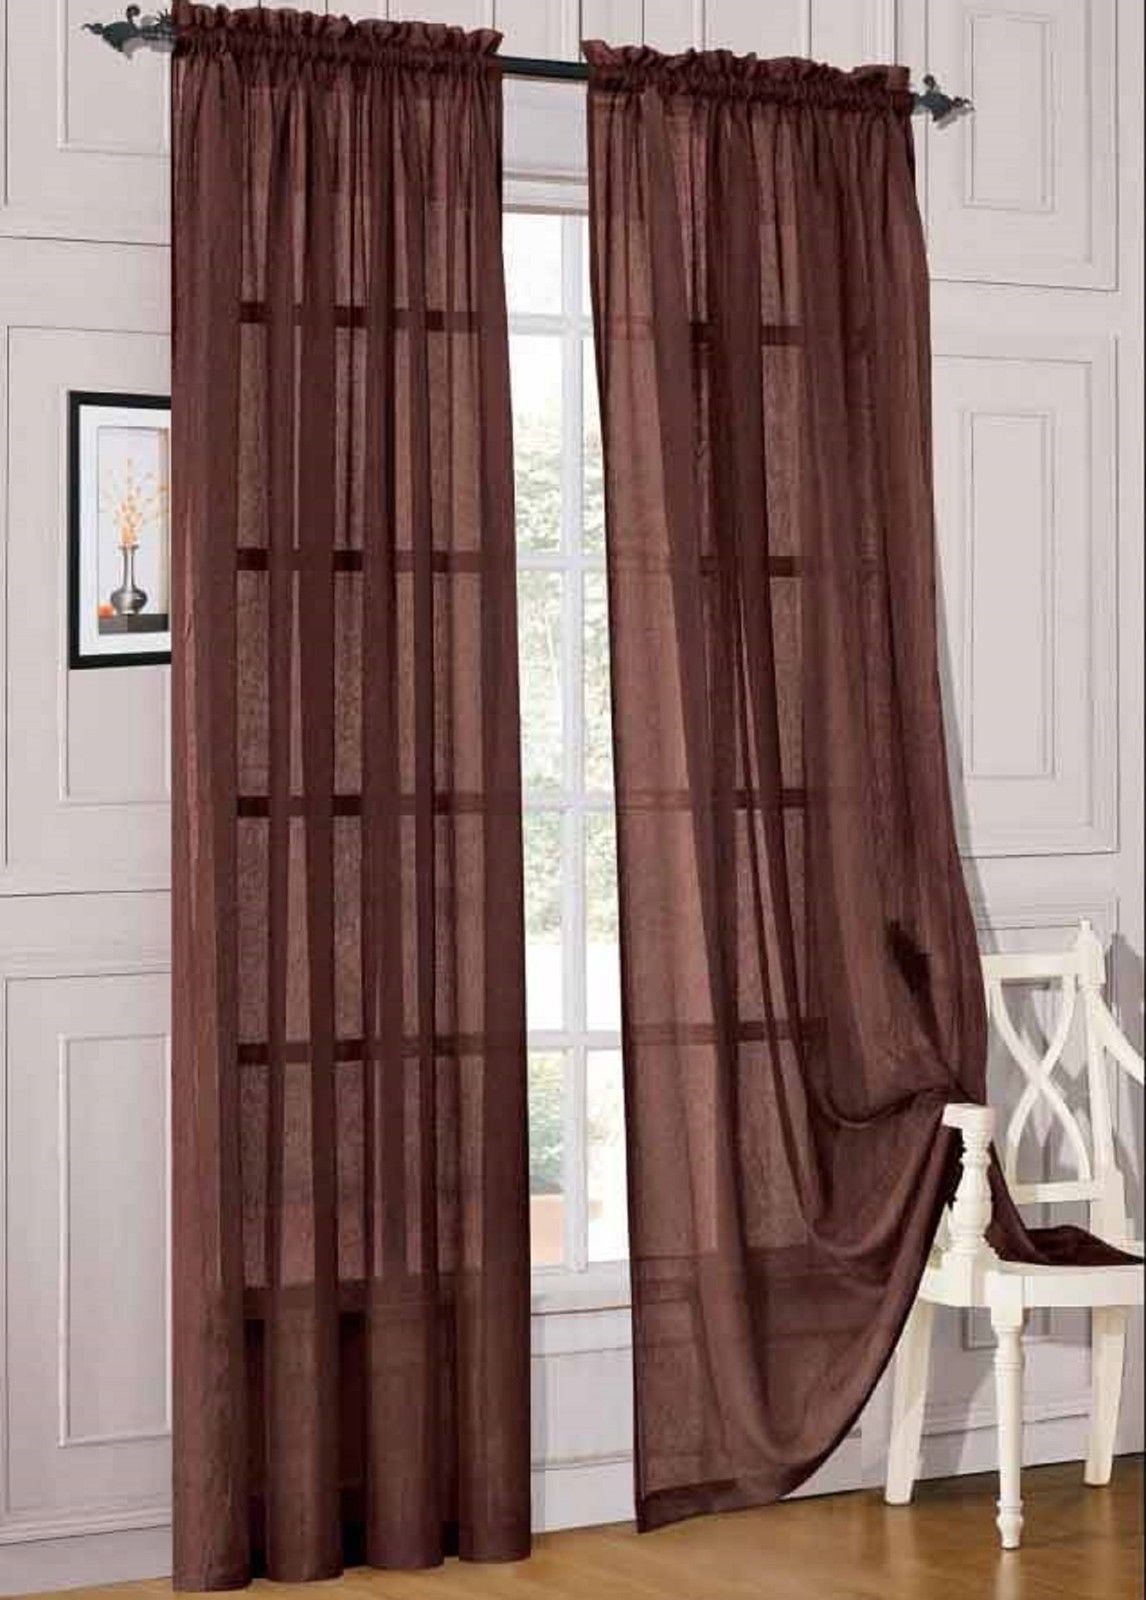 2 STRIPED VOILE SHEER WINDOW 8 GROMMET PANEL CURTAIN TREATMENT 55" X 95 " #C37 